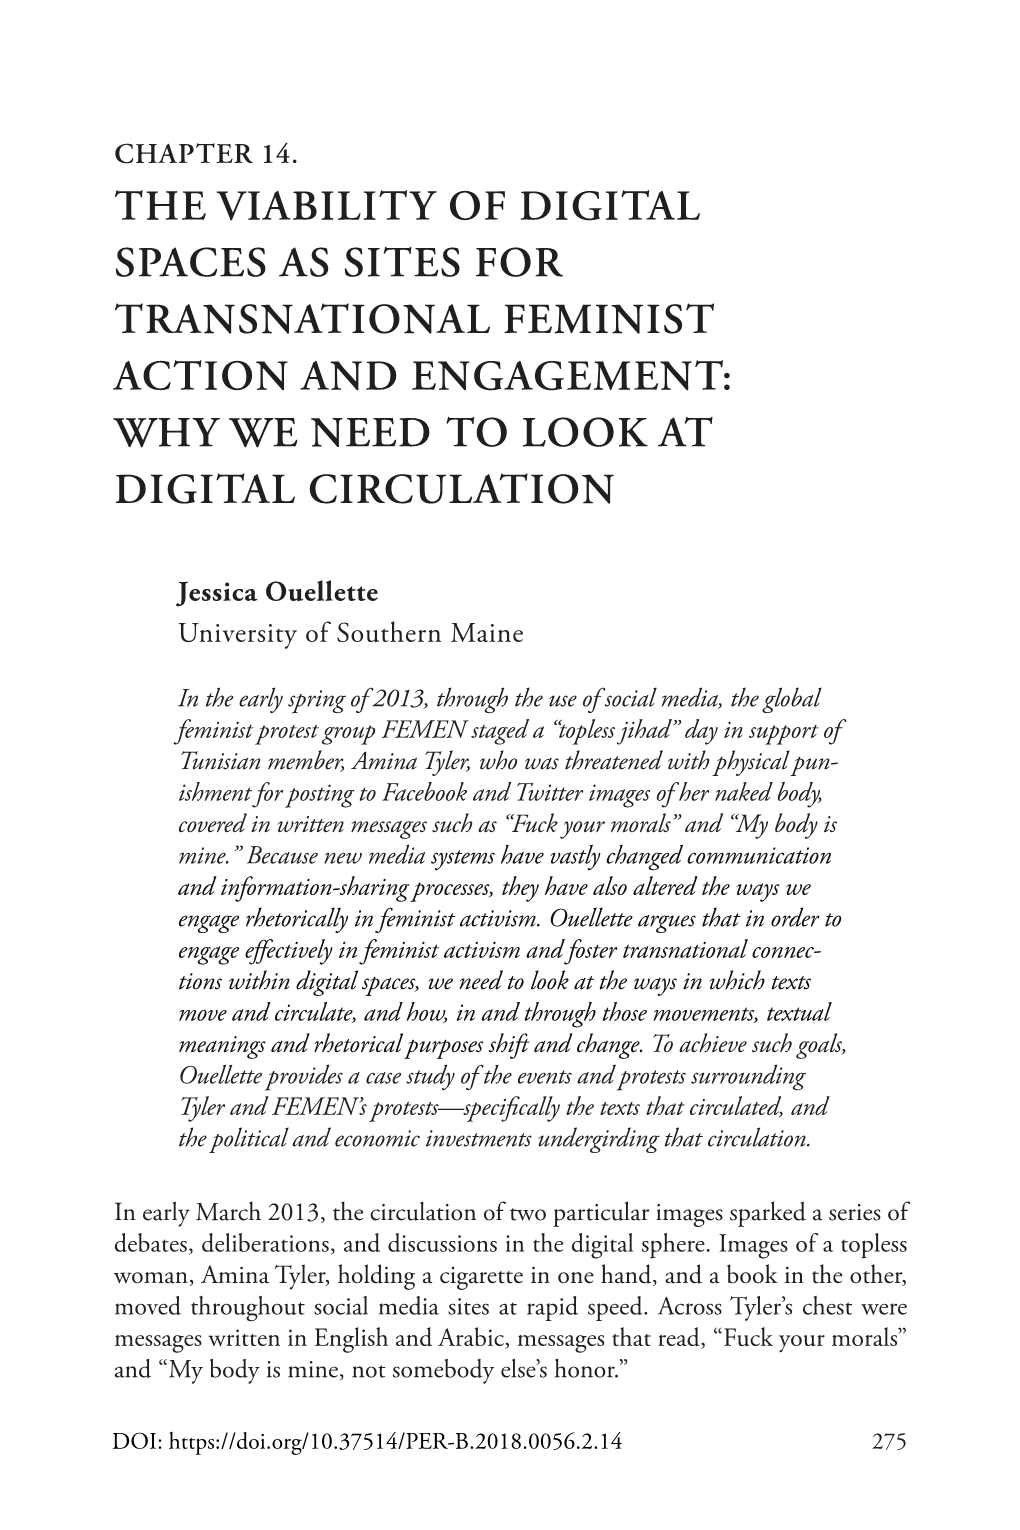 The Viability of Digital Spaces As Sites for Transnational Feminist Action and Engagement: Why We Need to Look at Digital Circulation